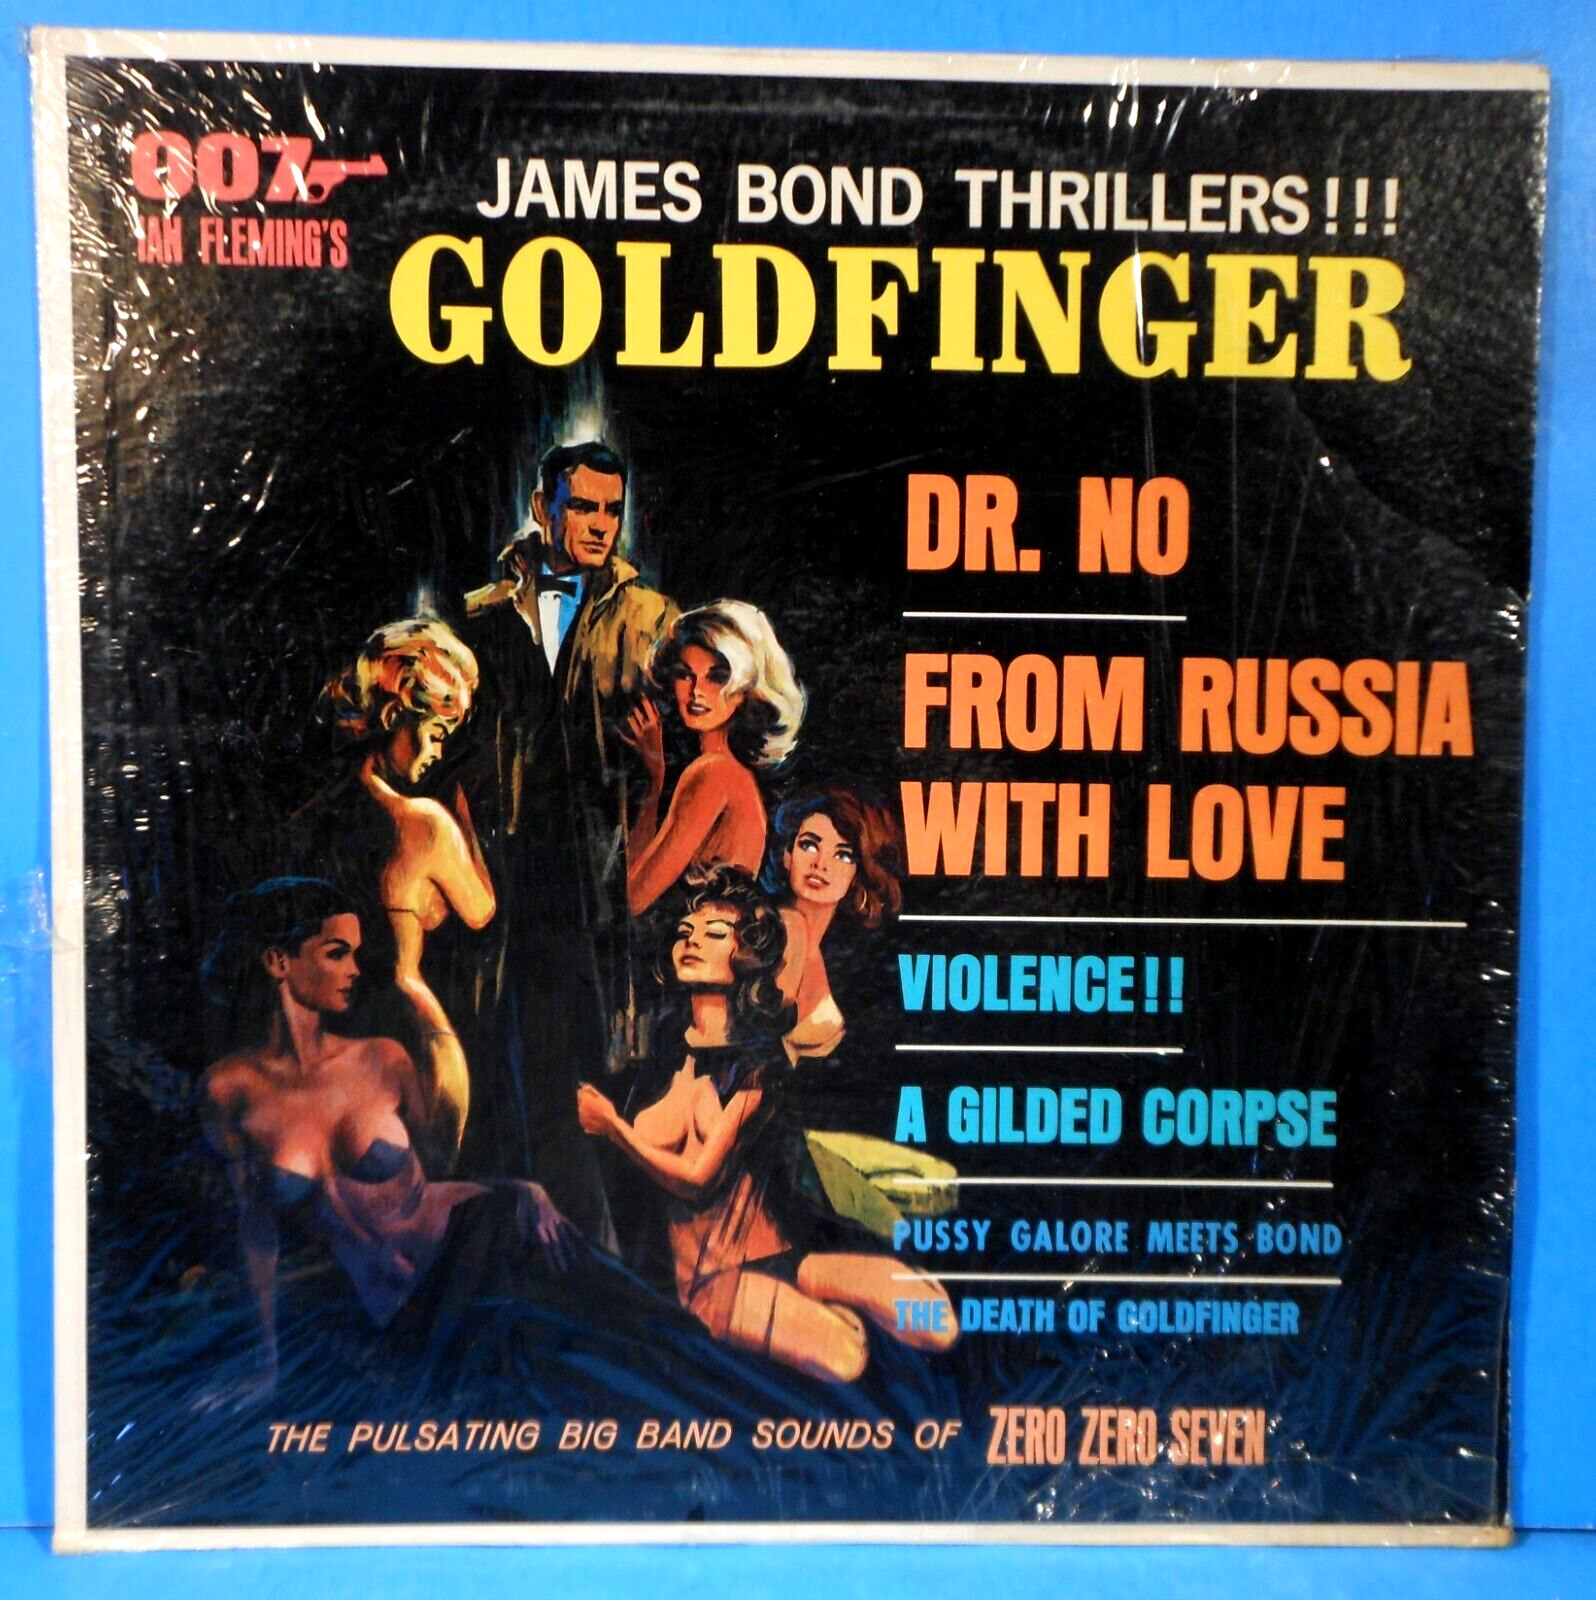 JAMES BOND THRILLERS! GOLDFINGER 1965 MONO SHRINK GREAT CONDITION! VG+/VG++!!A